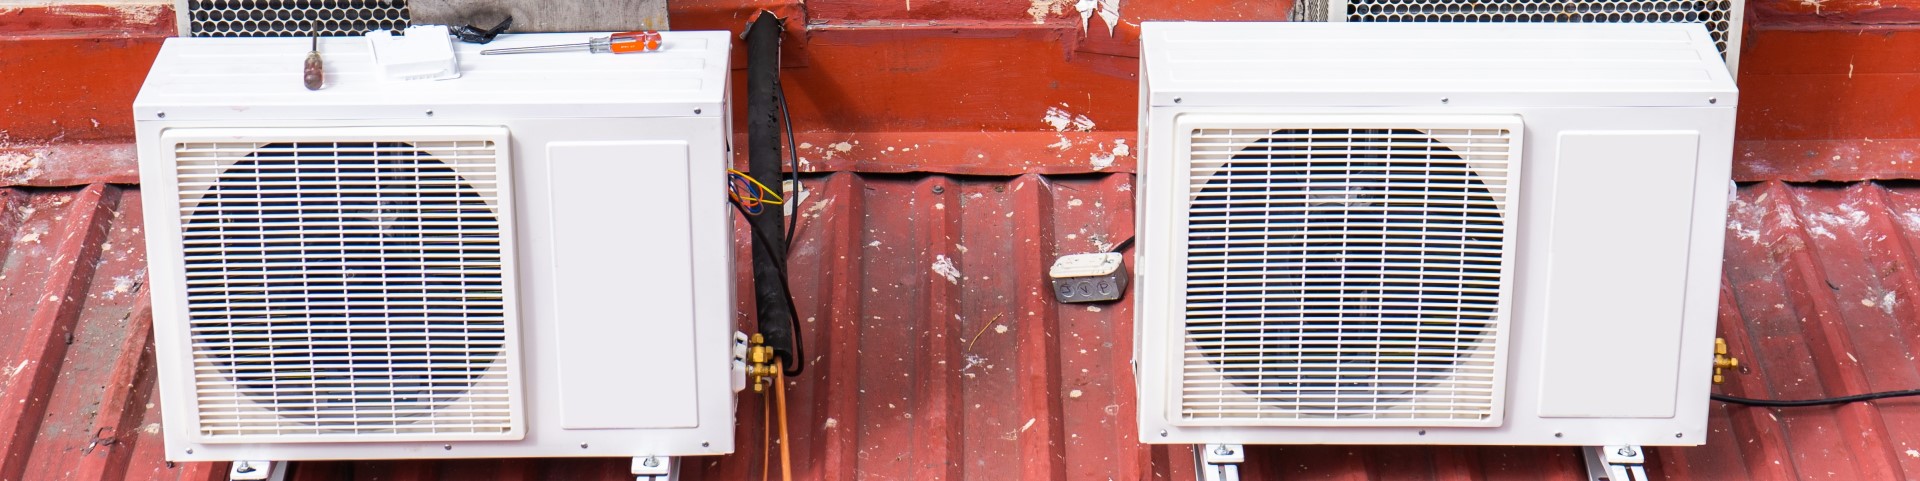 Two air conditioners on a red roof